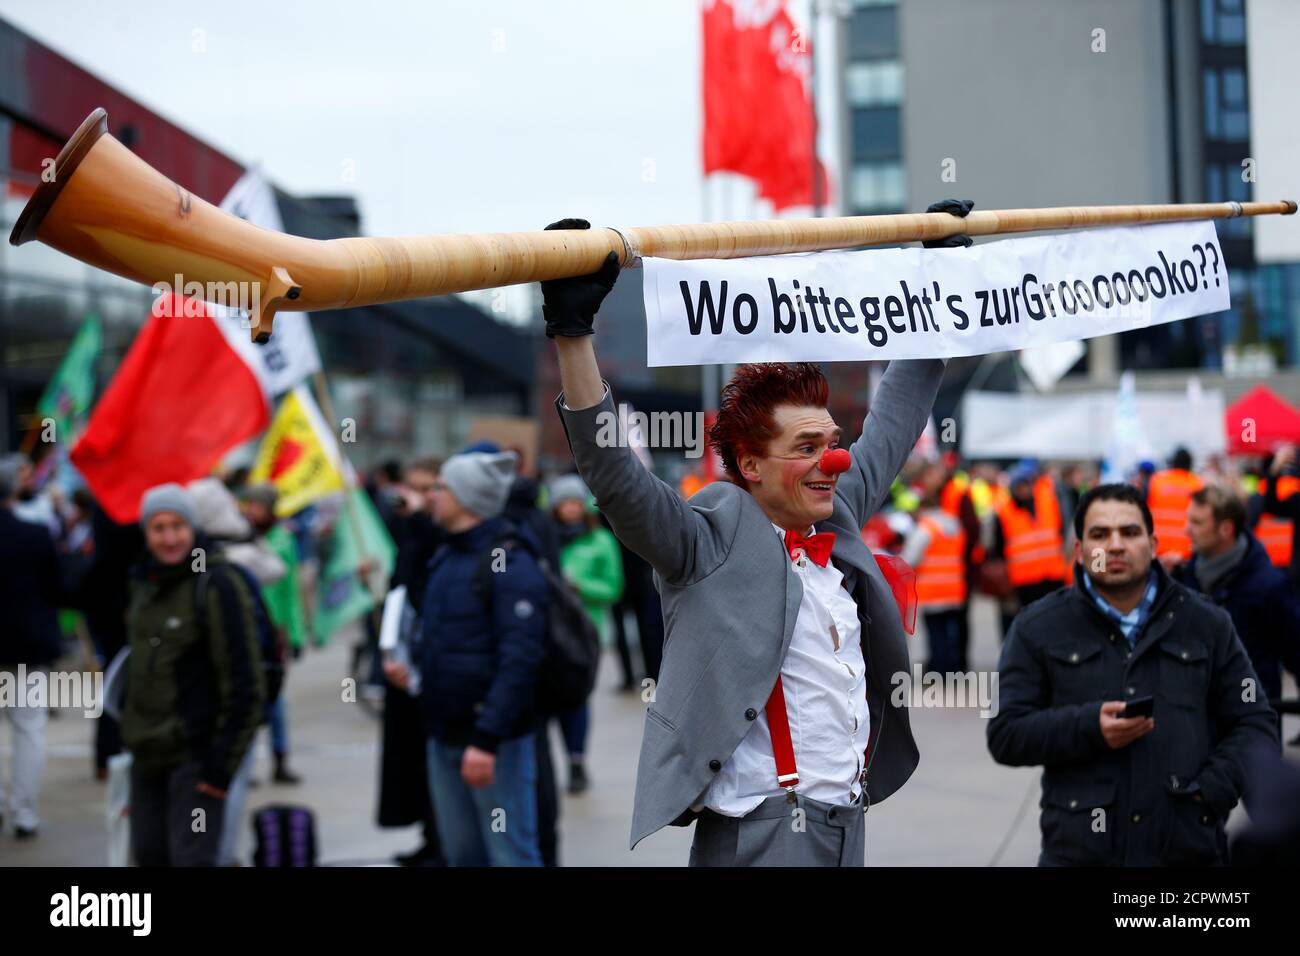 Clown Tic performs in front of the SPD's party congress venue in Bonn, Germany, January 21, 2018. Banner reads 'Where is the way to the GroKo (coalition of CDU/CSU and SPD)'. REUTERS/Thilo Schmuelgen Stock Photo